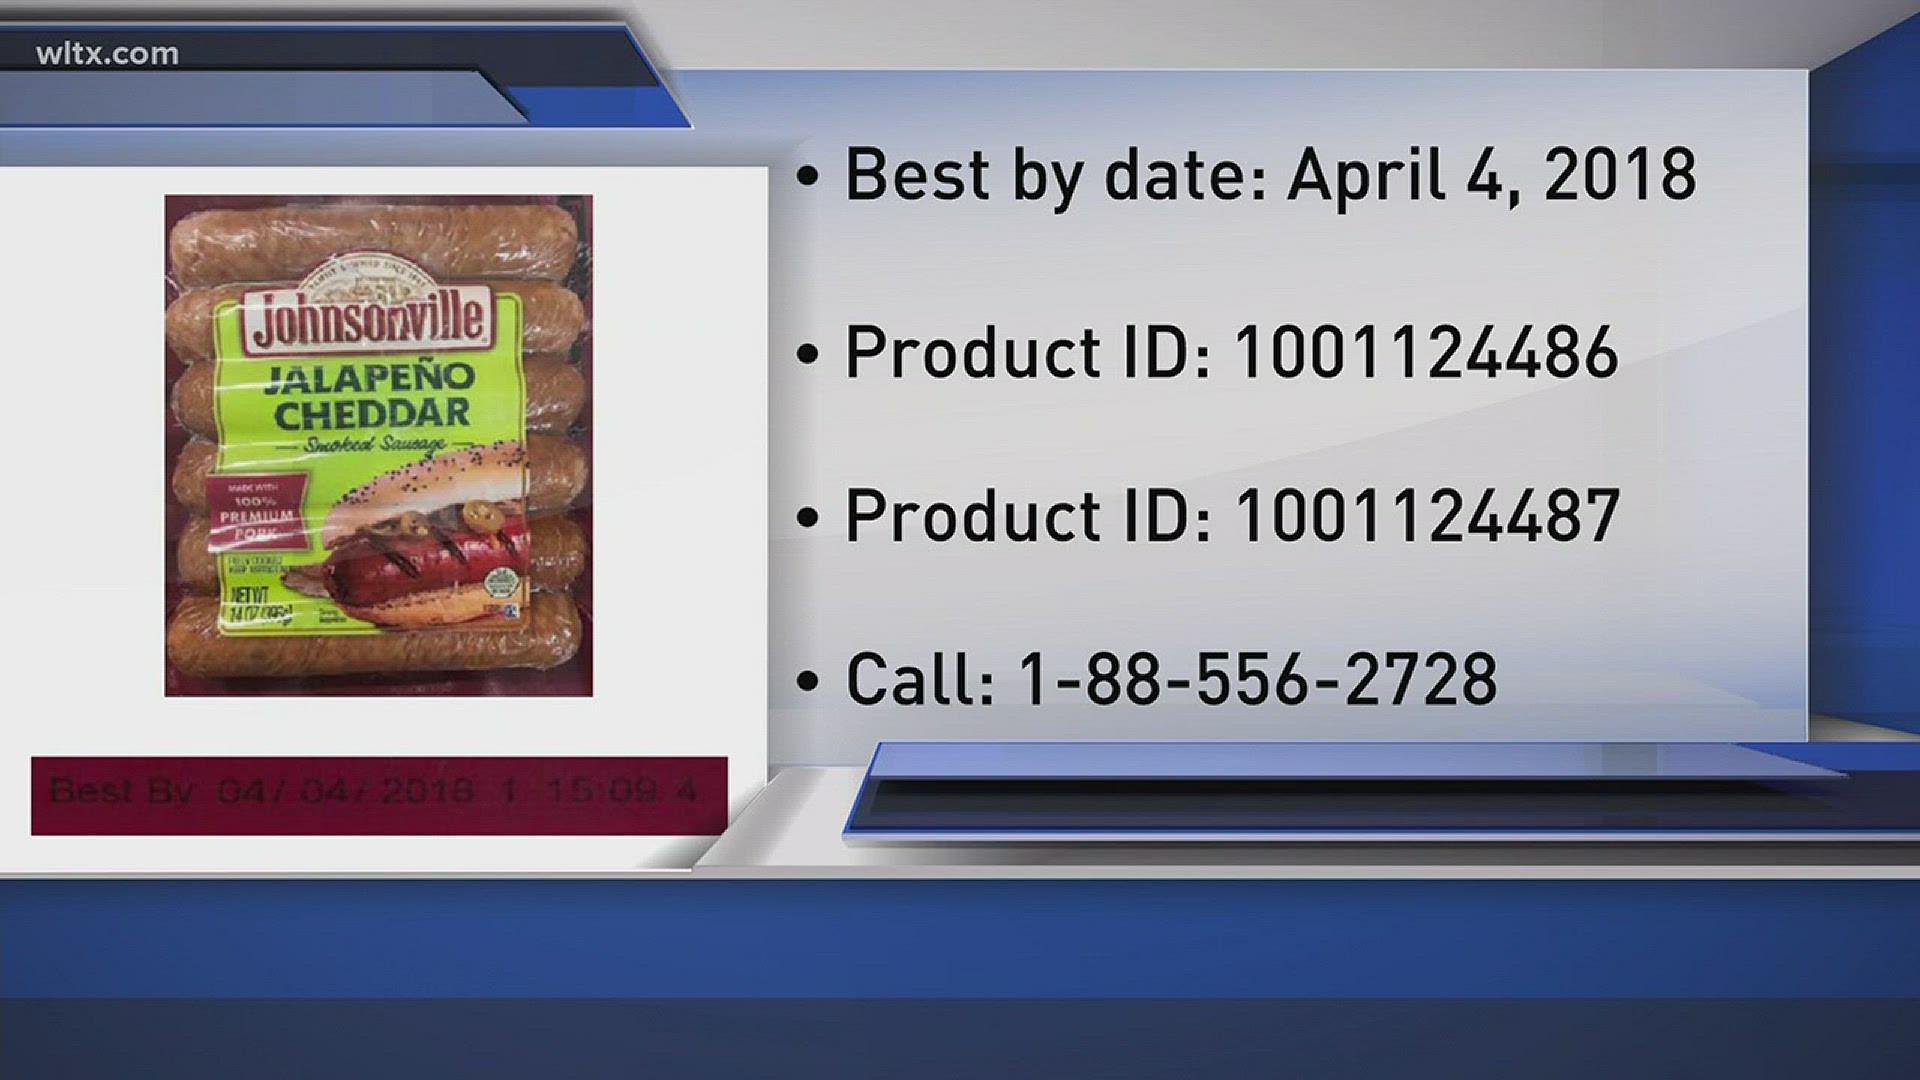 The recalls affects jalapeno cheddar sausages.